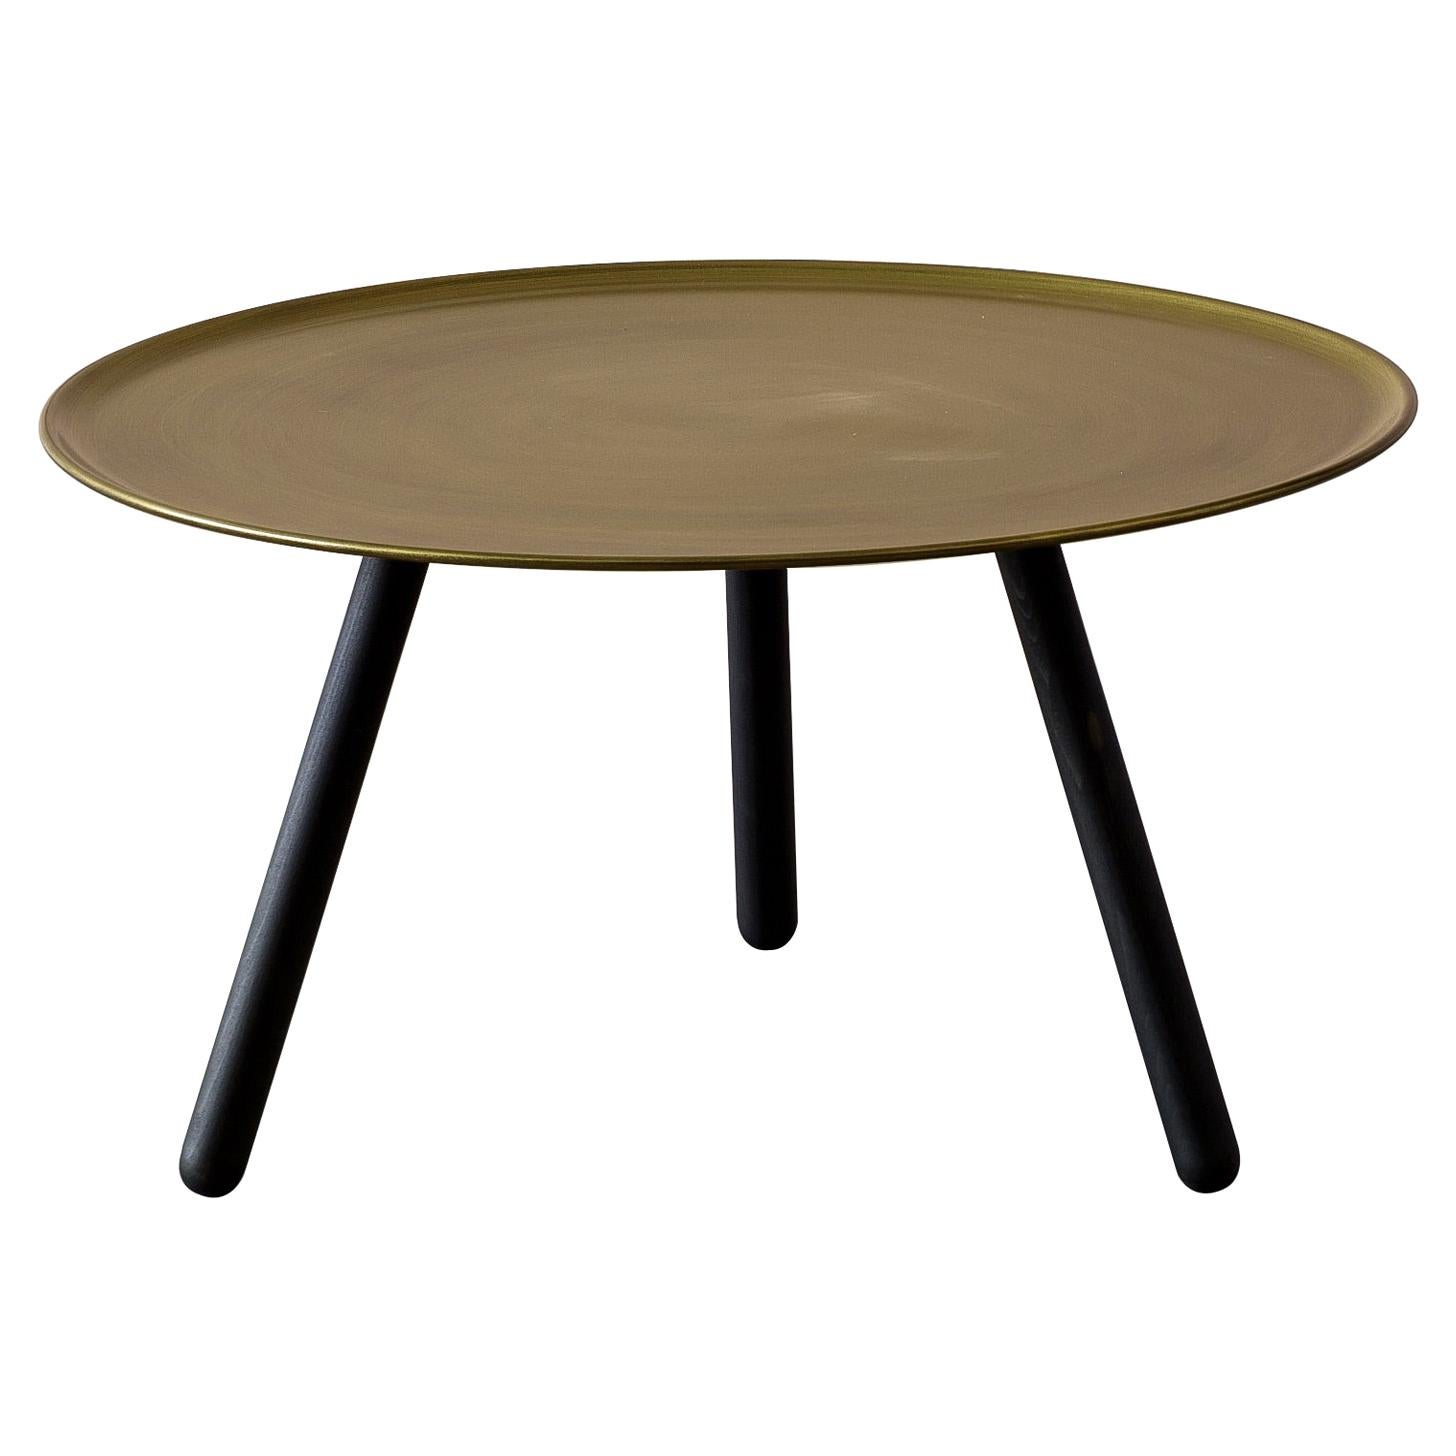 For Sale: Brown (Bronze Metal) Pinocchio Low Coffee Table in Black Aniline Base, by Giopato & Coombes